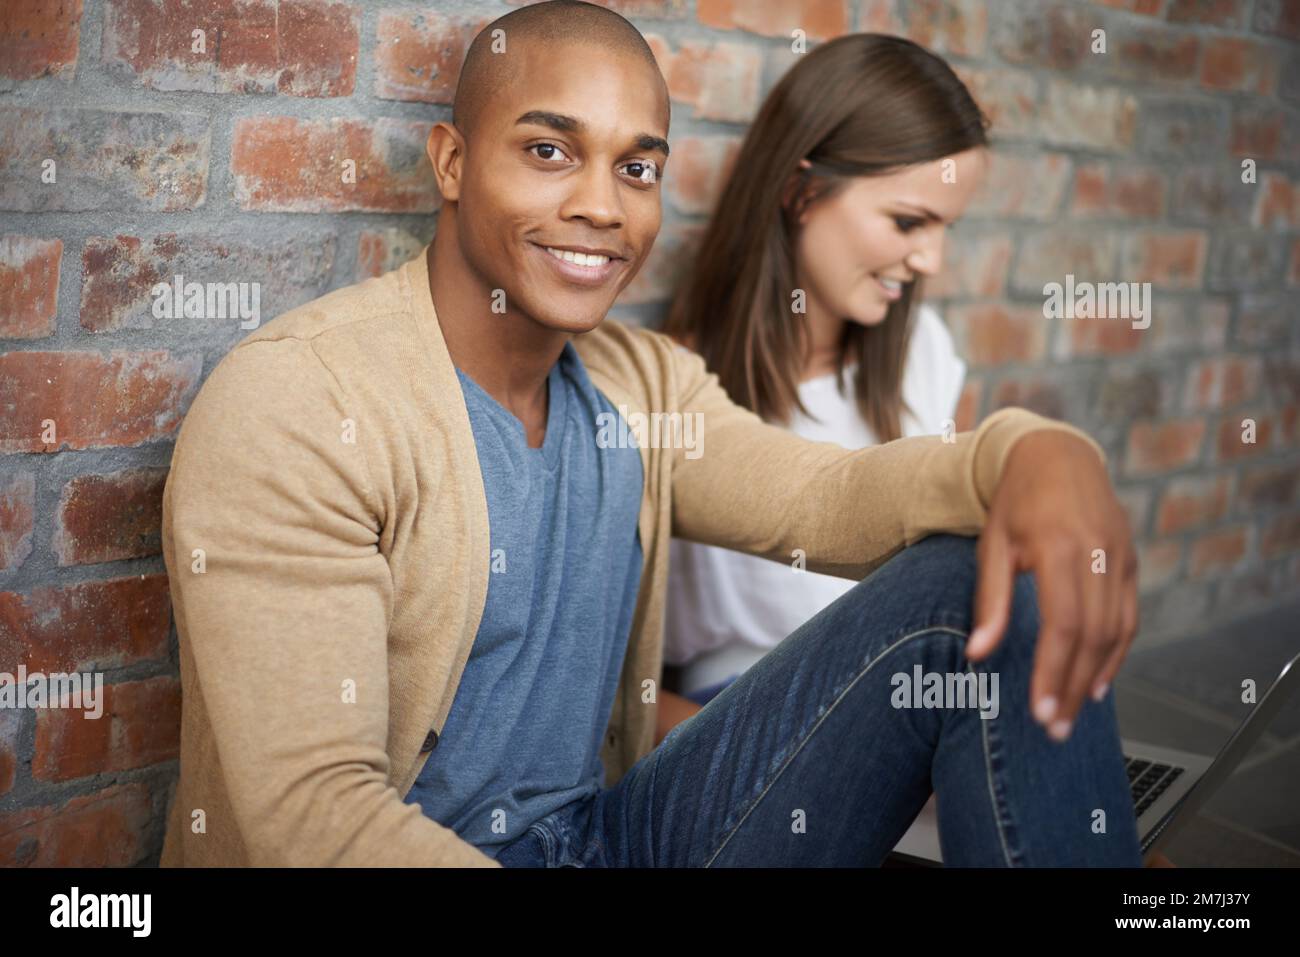 Relaxing with a friend. two friends sitting together in a hallway. Stock Photo